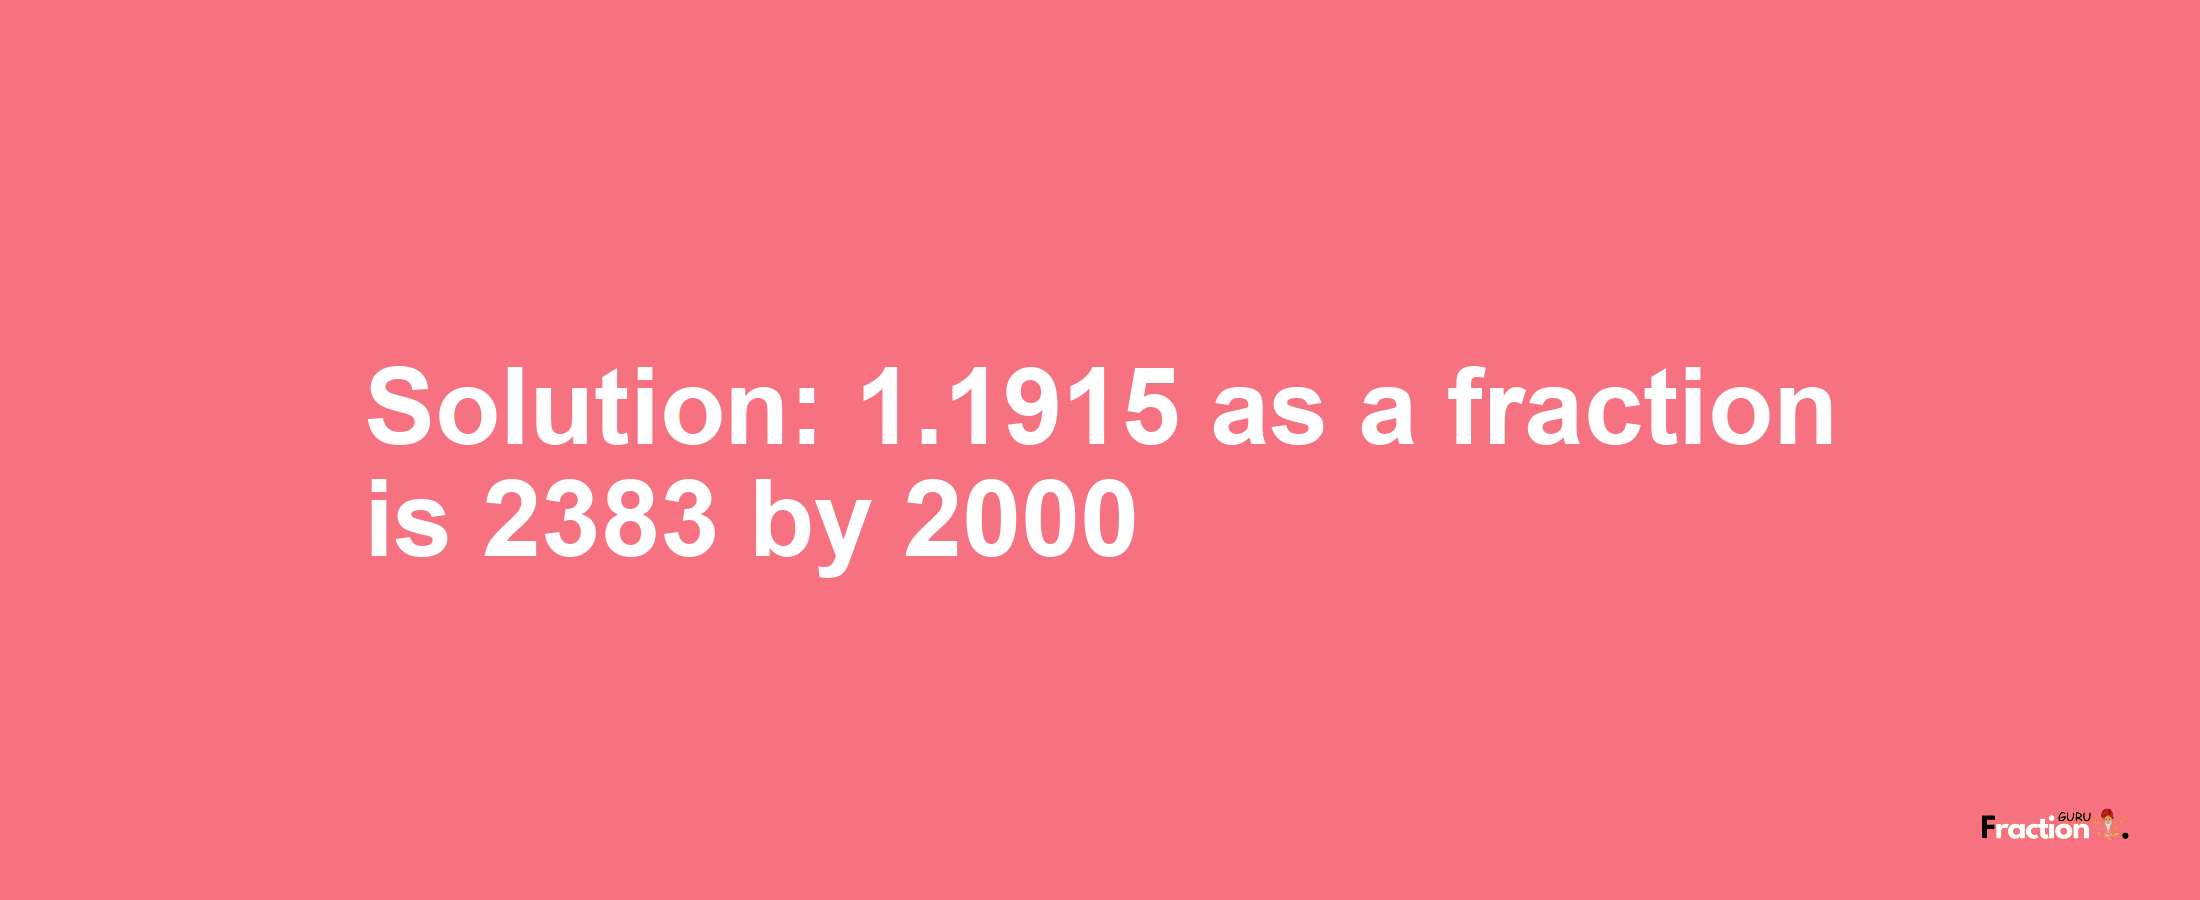 Solution:1.1915 as a fraction is 2383/2000